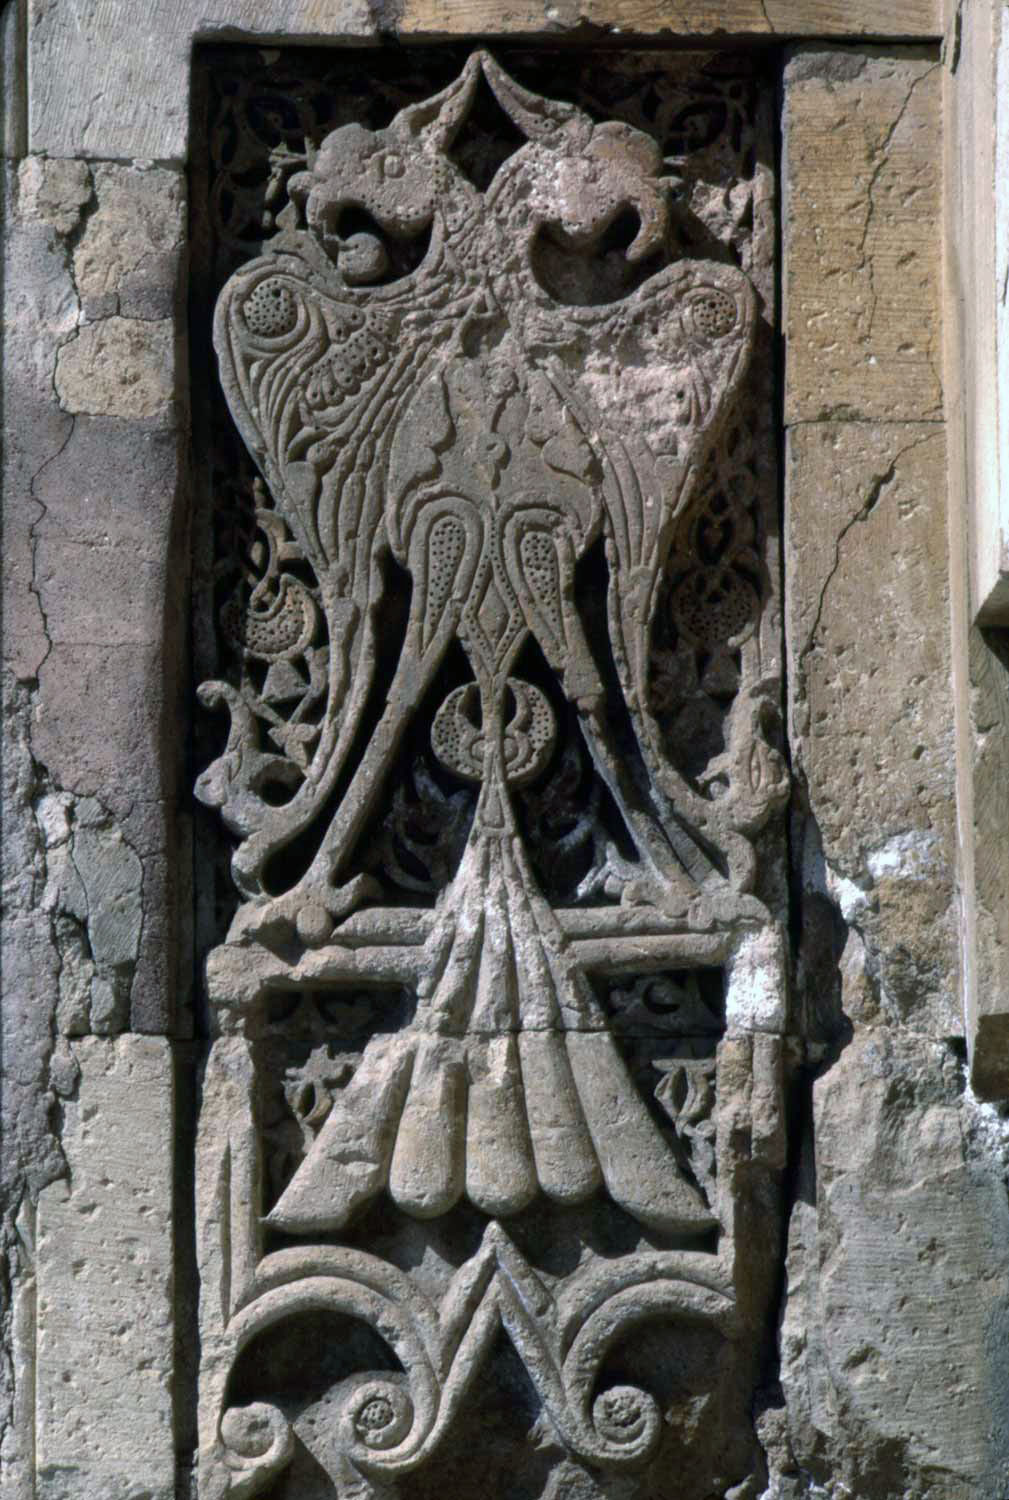 Two -headed eagle carved in west portal of mosque